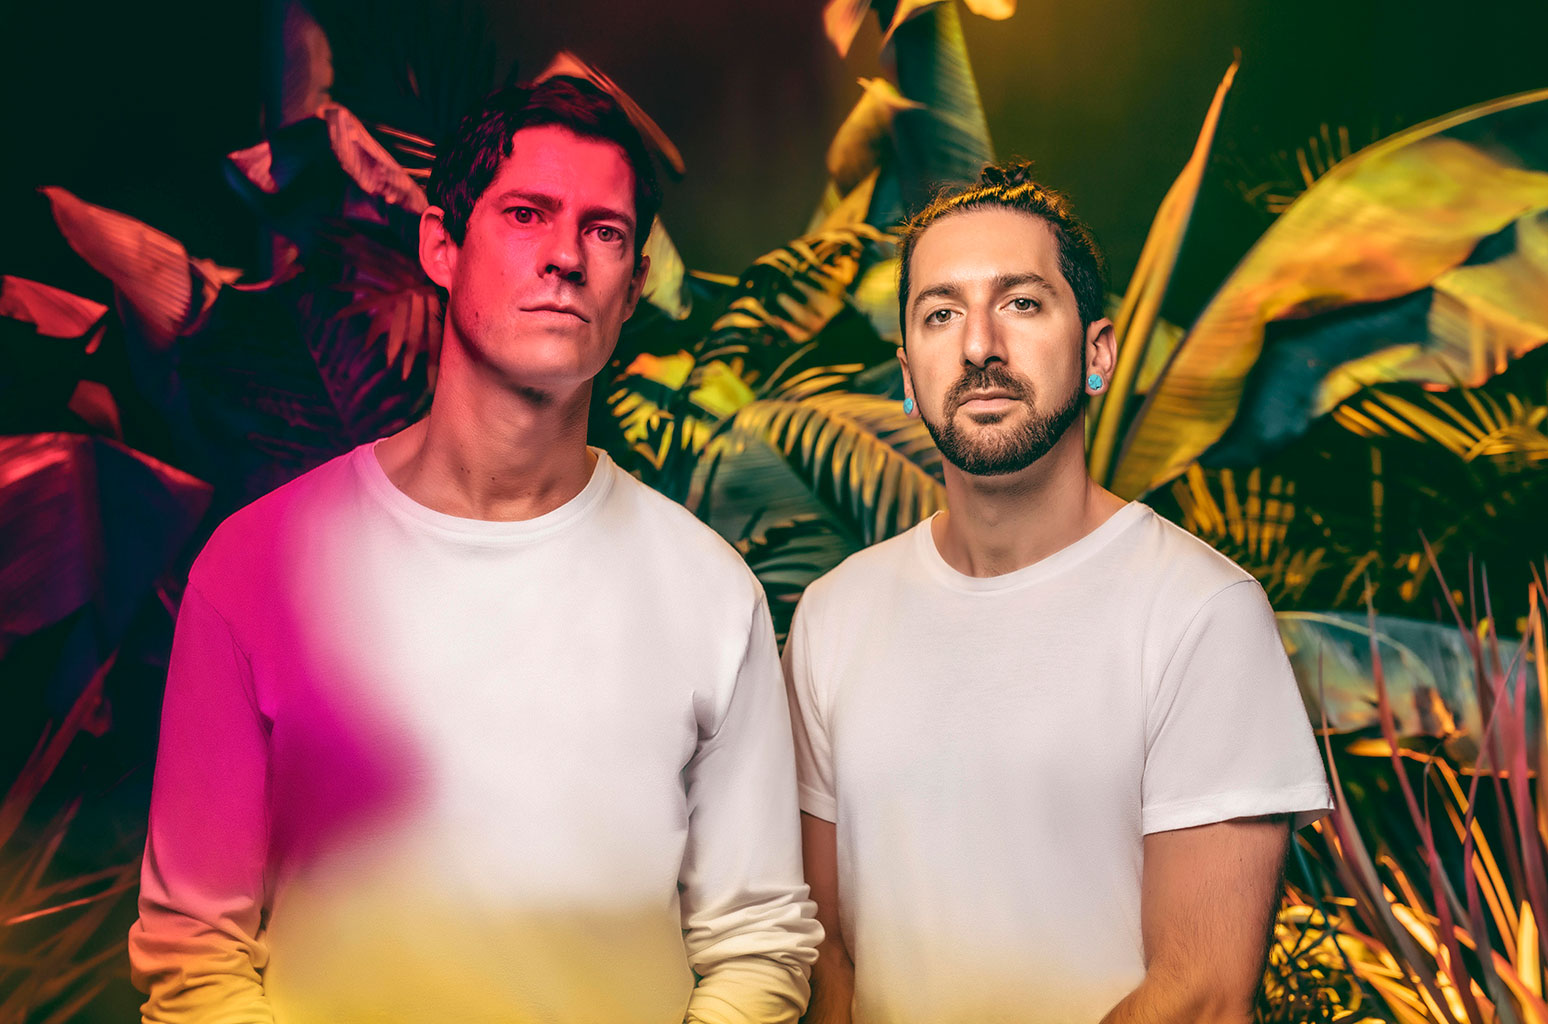 Hear Big Gigantic's Hot New Track 'Burning Love' Ahead of Their Forthcoming Album